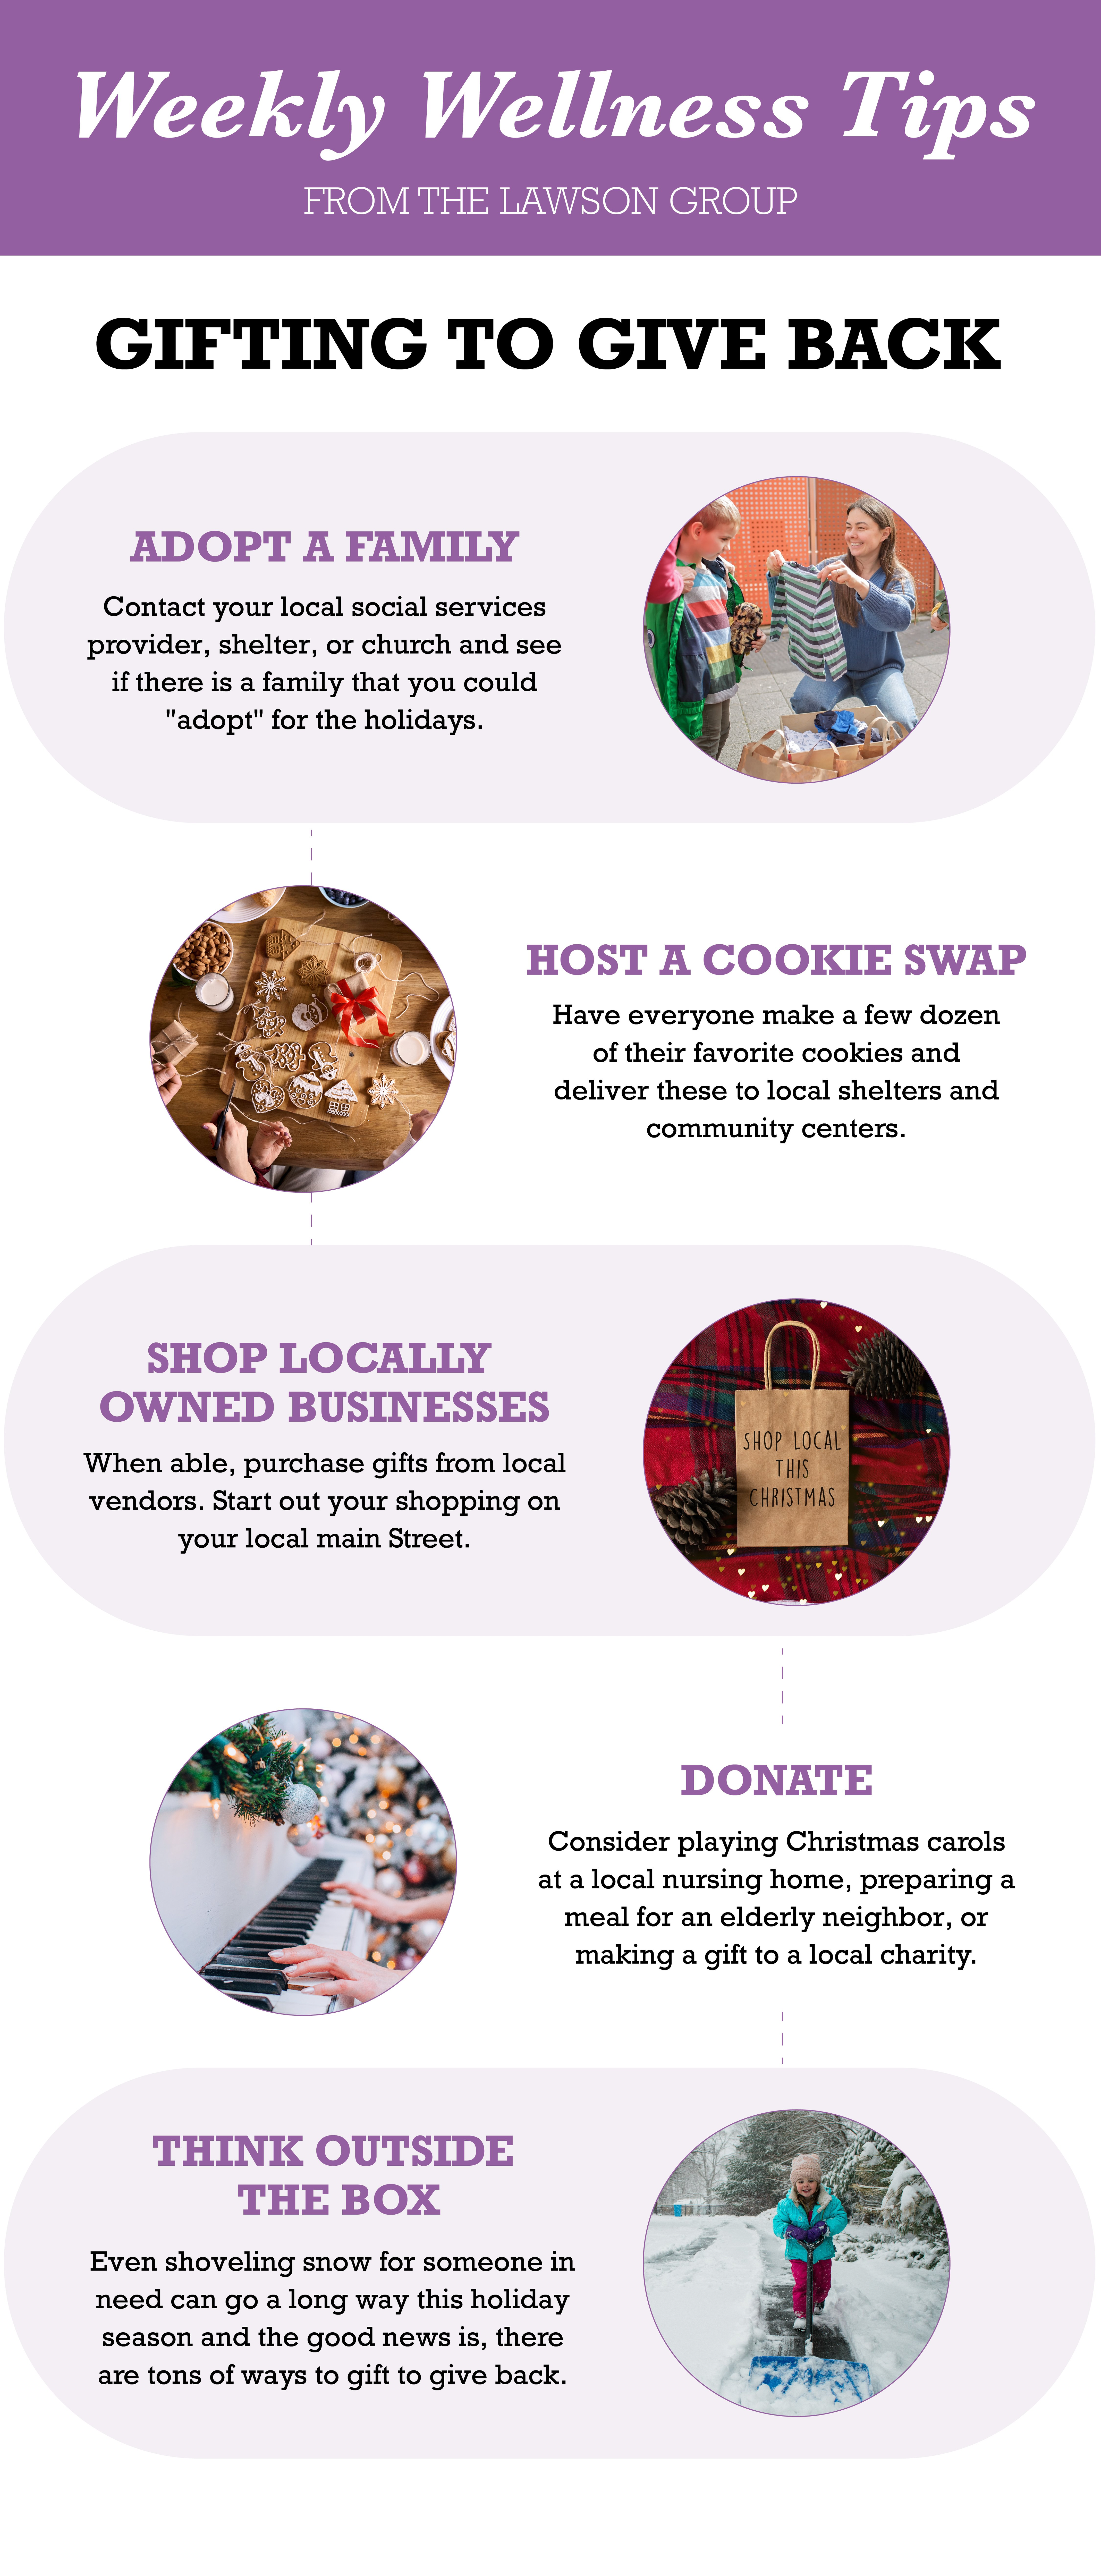 TLG22005 Wellness Tips  Gifting to Give Back Infographic-1080px-01